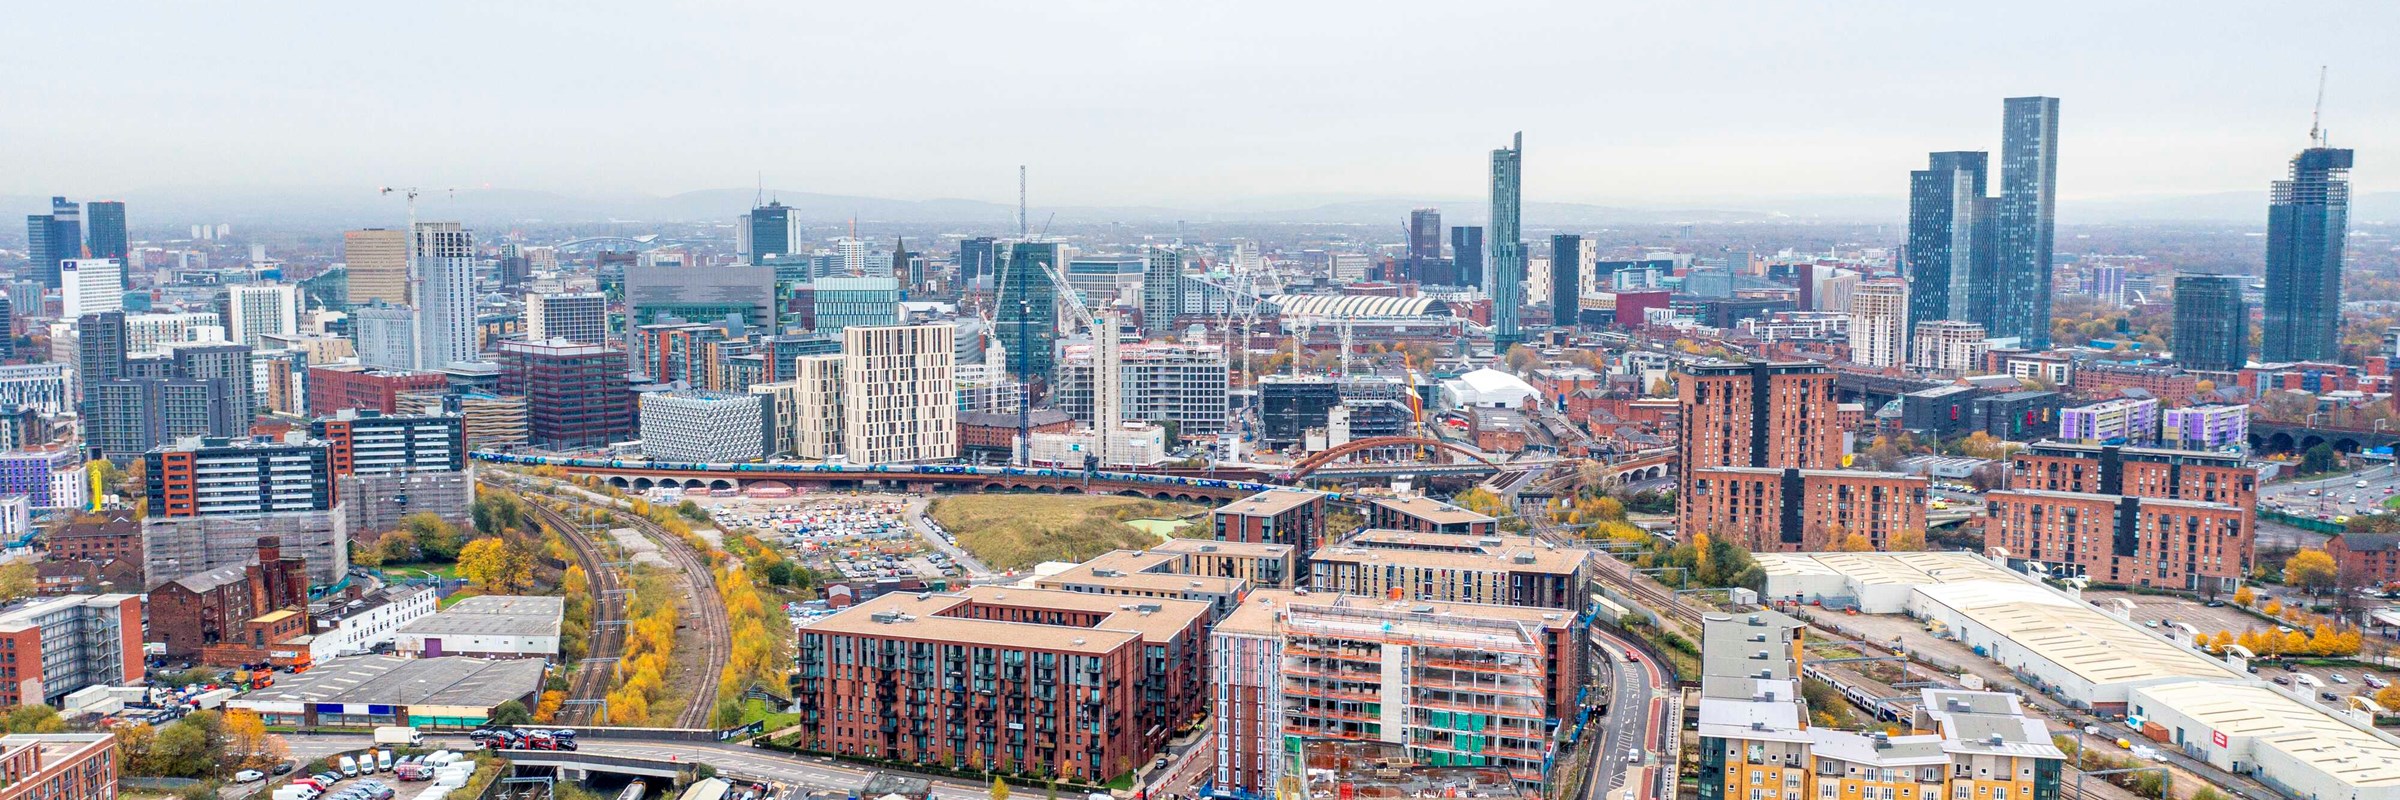 Expansive view of the City of Manchester from the sky